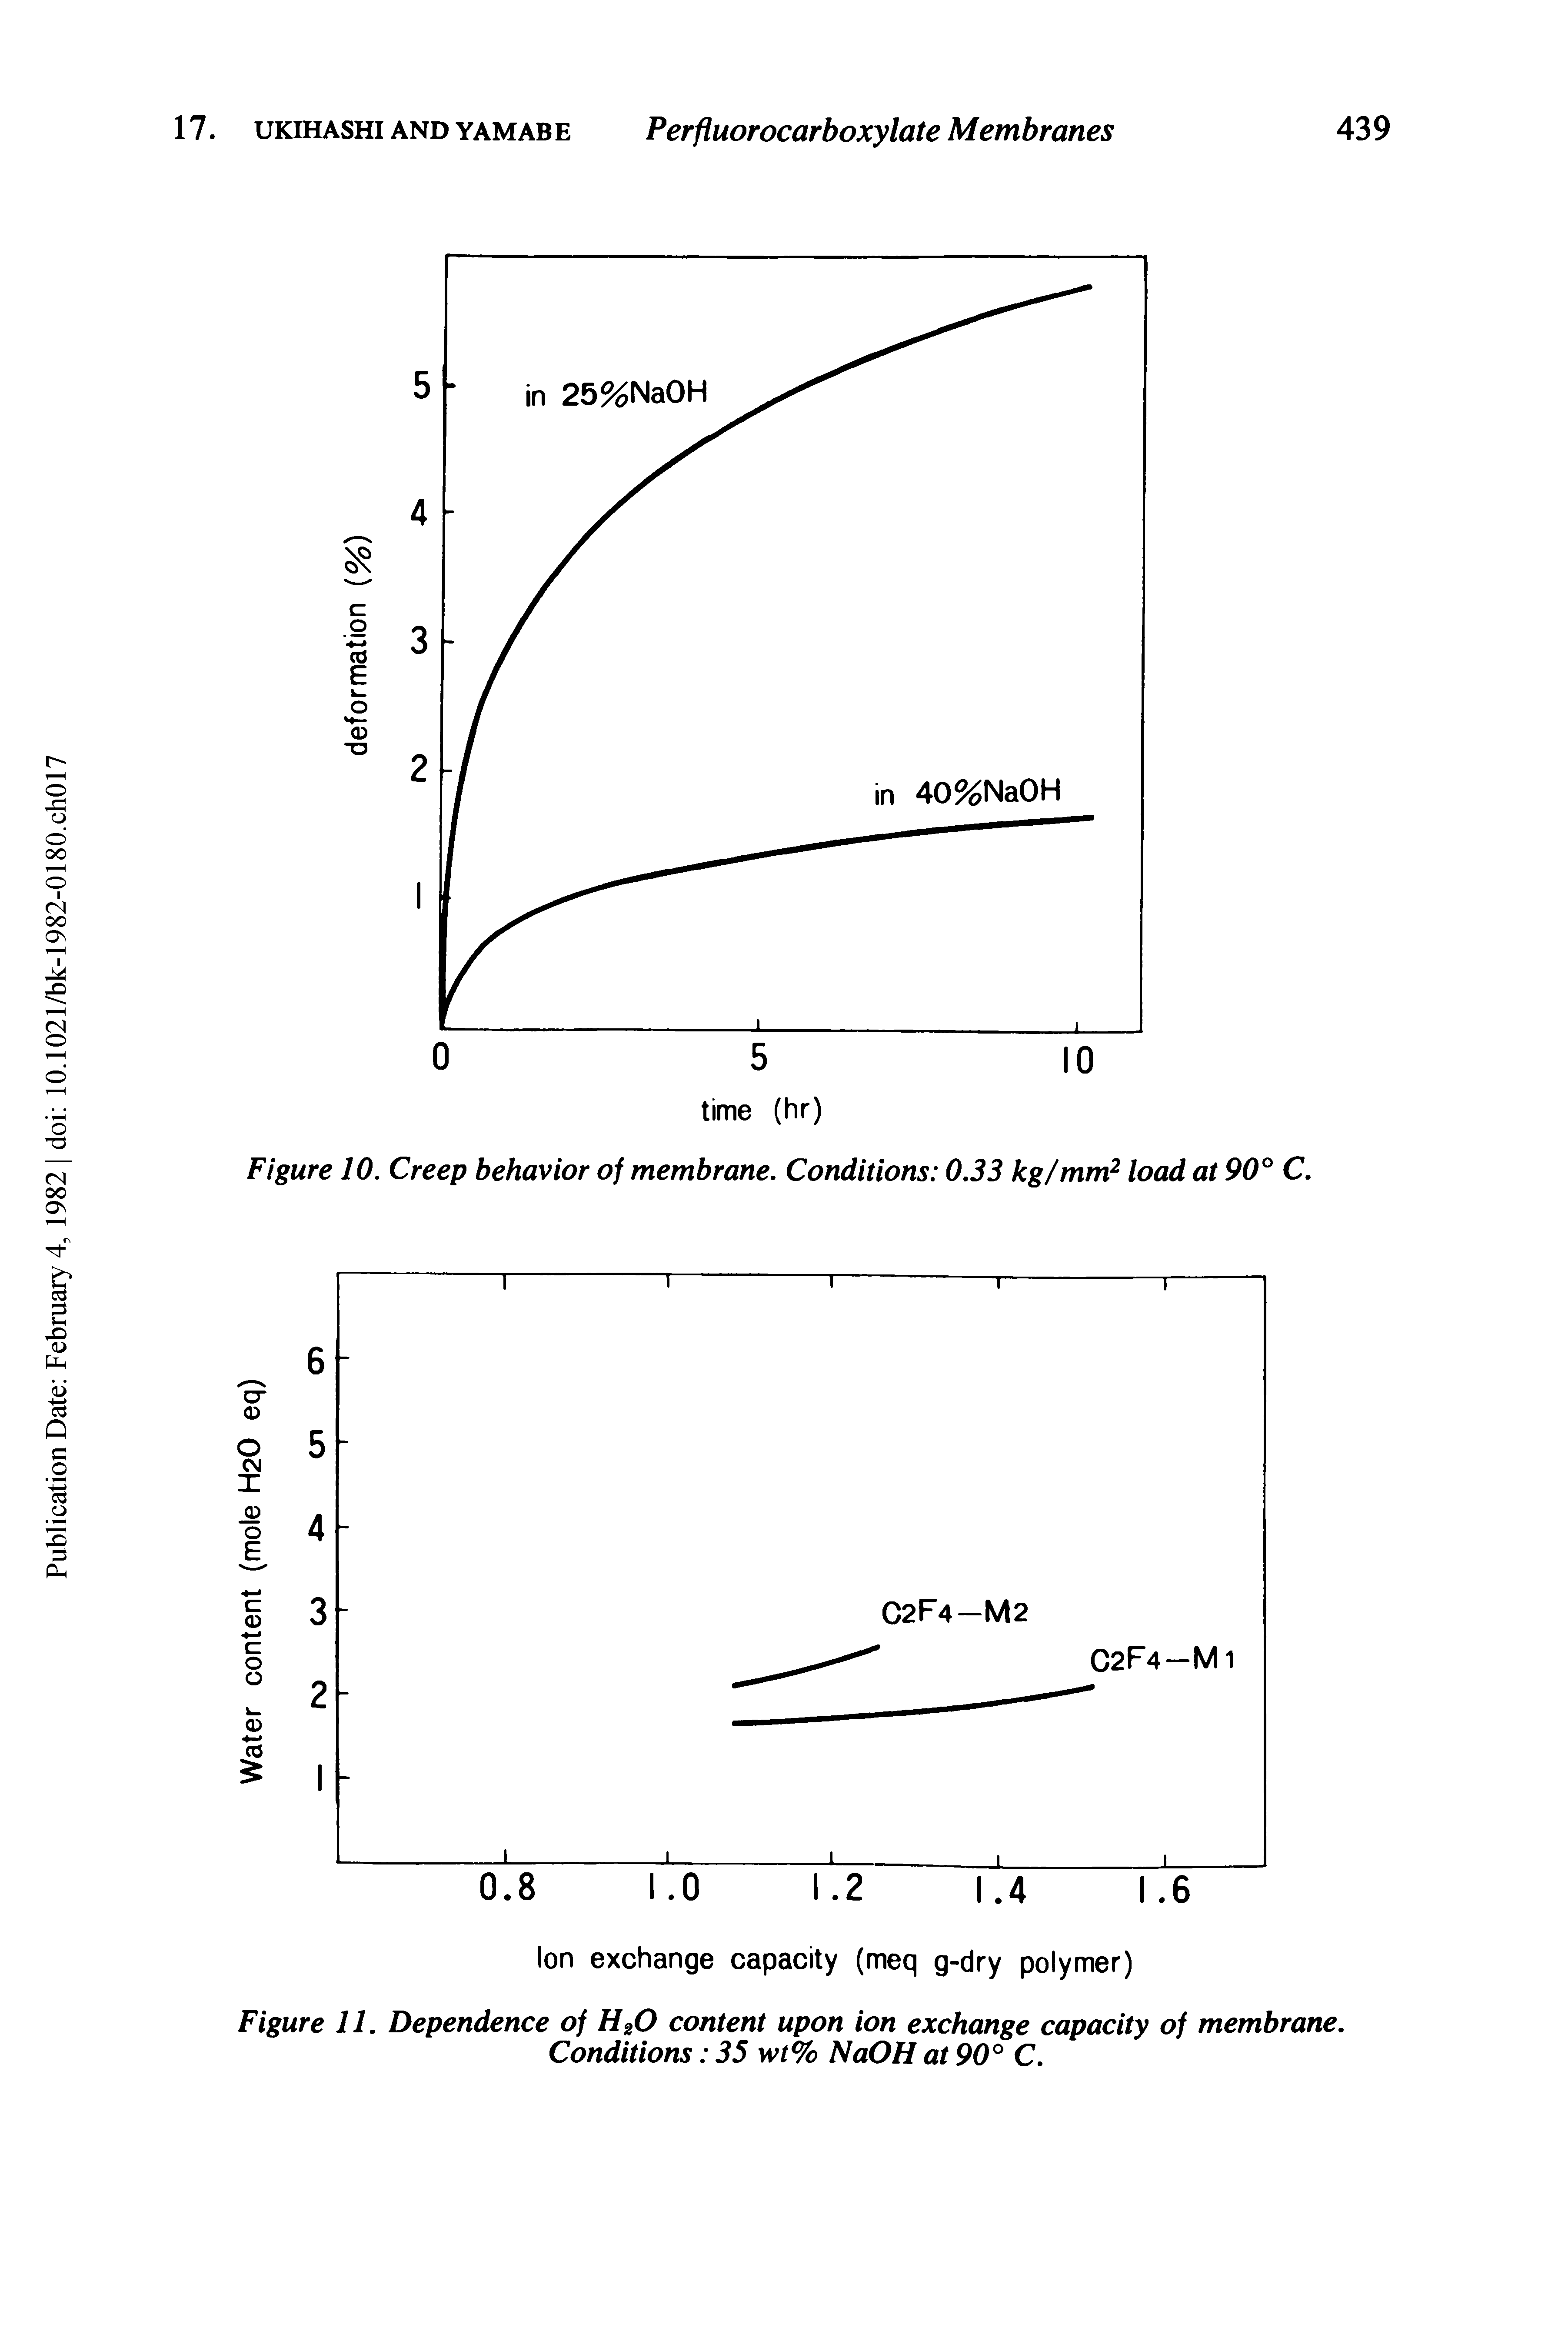 Figure 11. Dependence of H20 content upon ion exchange capacity of membrane. Conditions 35 wt% NaOH at 90° C.